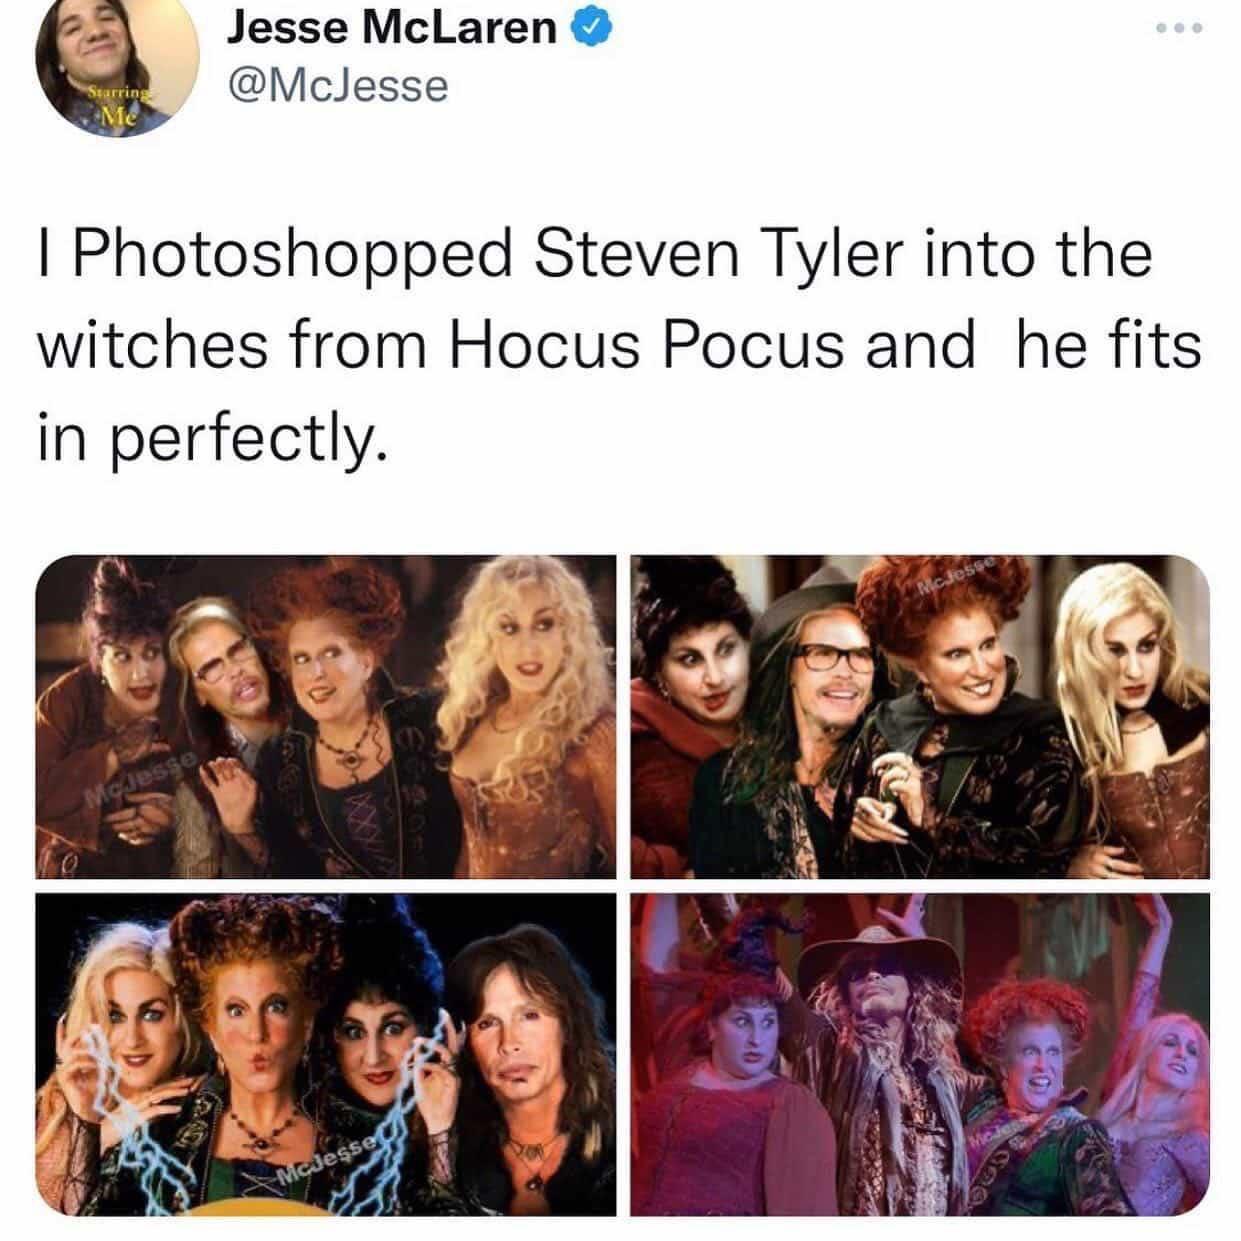 monday morning randomness - collage - Starring Me Jesse McLaren I Photoshopped Steven Tyler into the witches from Hocus Pocus and he fits in perfectly. McJesse McJesse